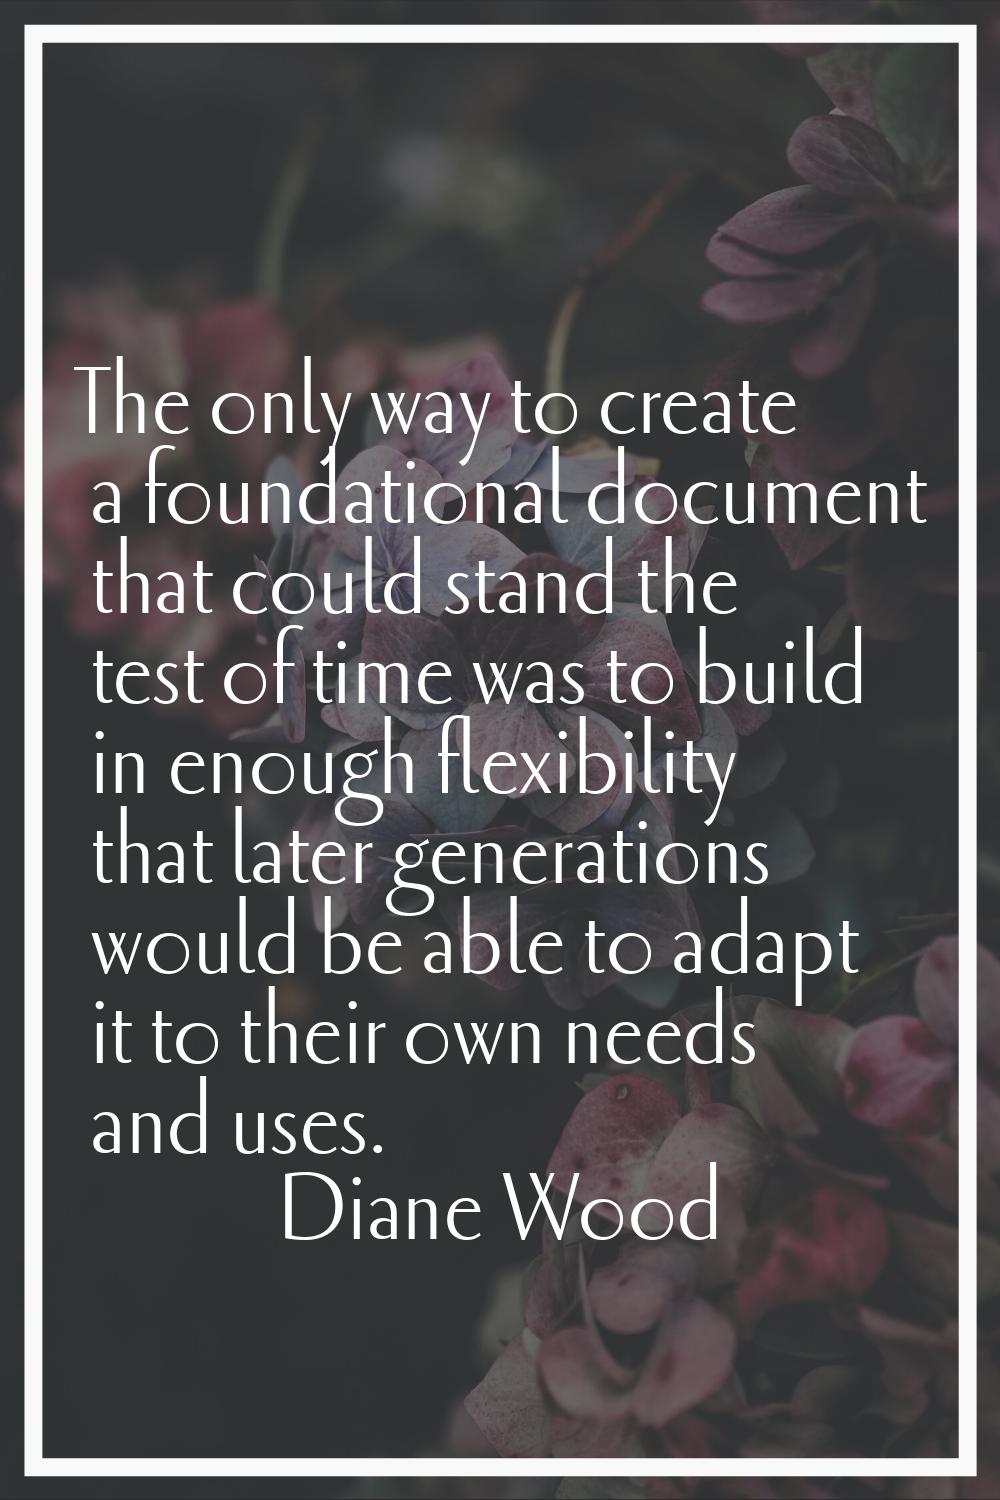 The only way to create a foundational document that could stand the test of time was to build in en